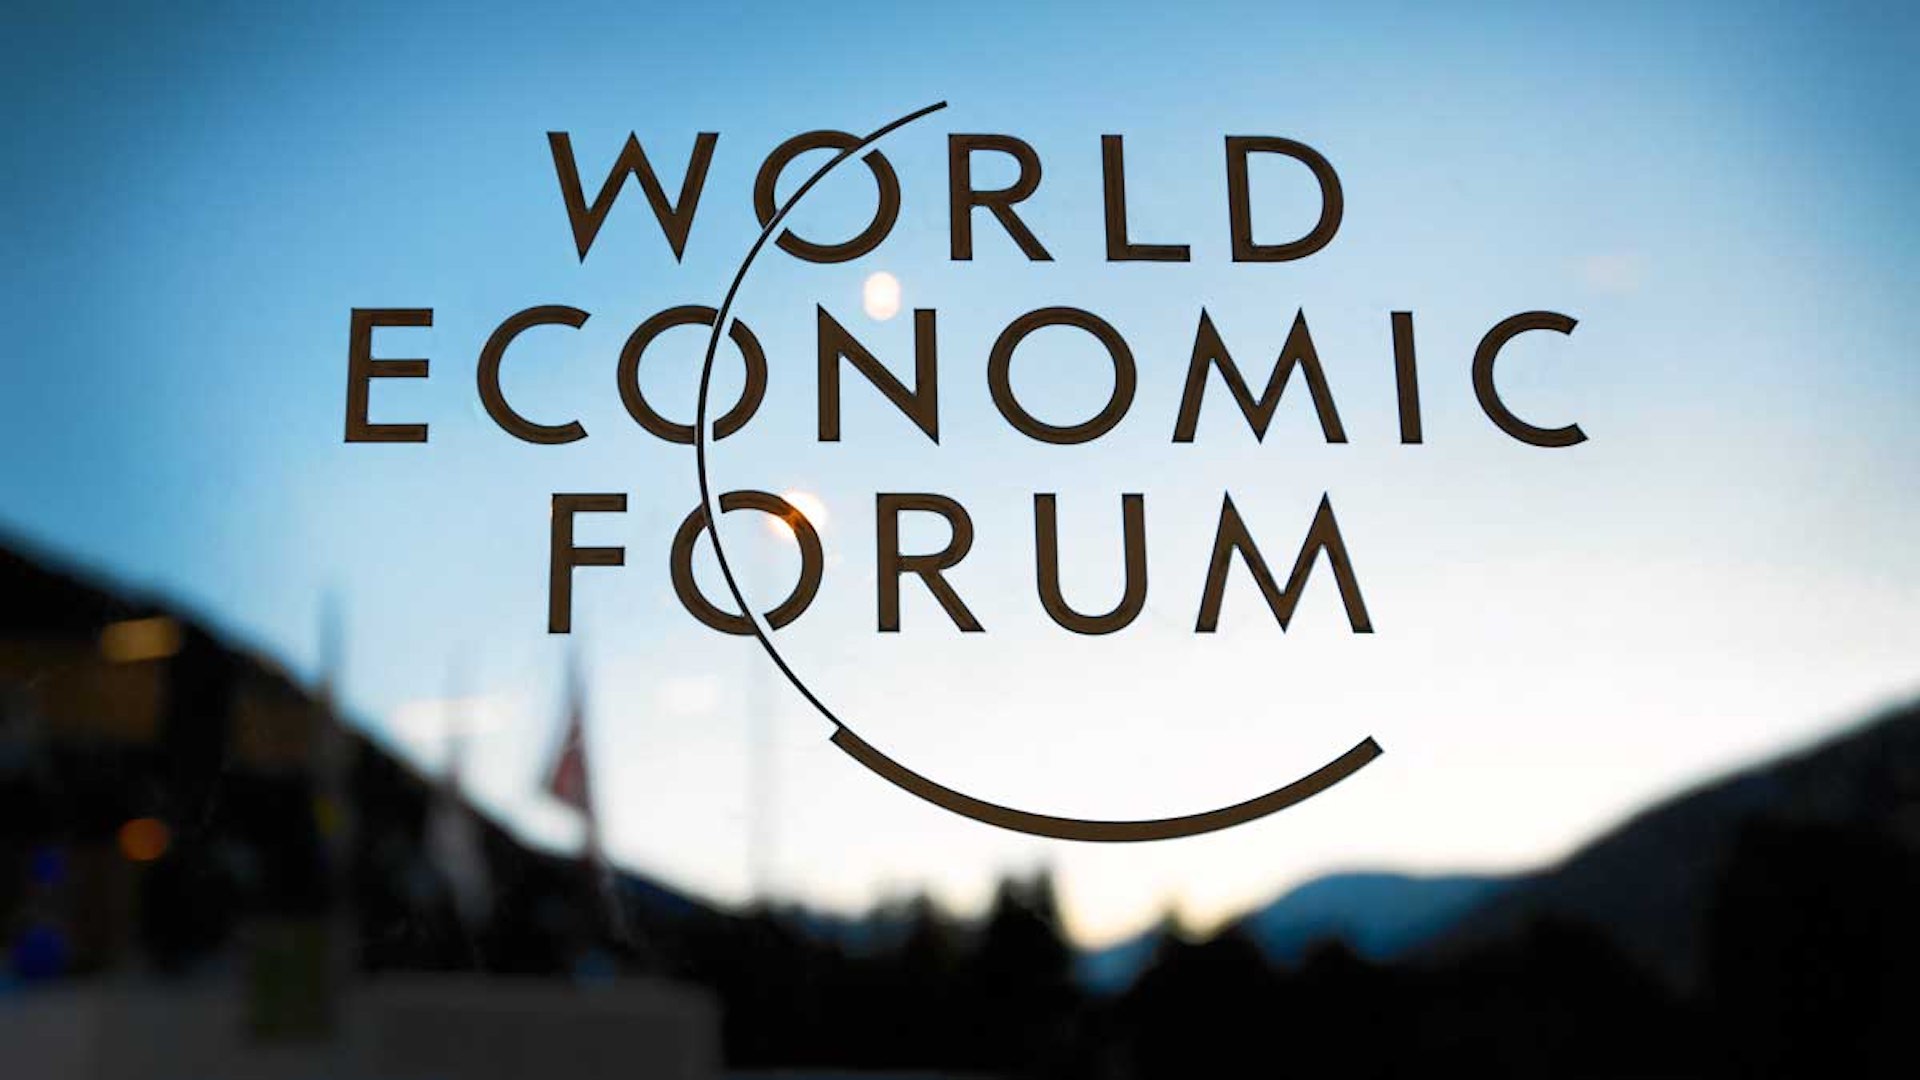 World Economic Forum offers an integrated blueprint for future-ready cities